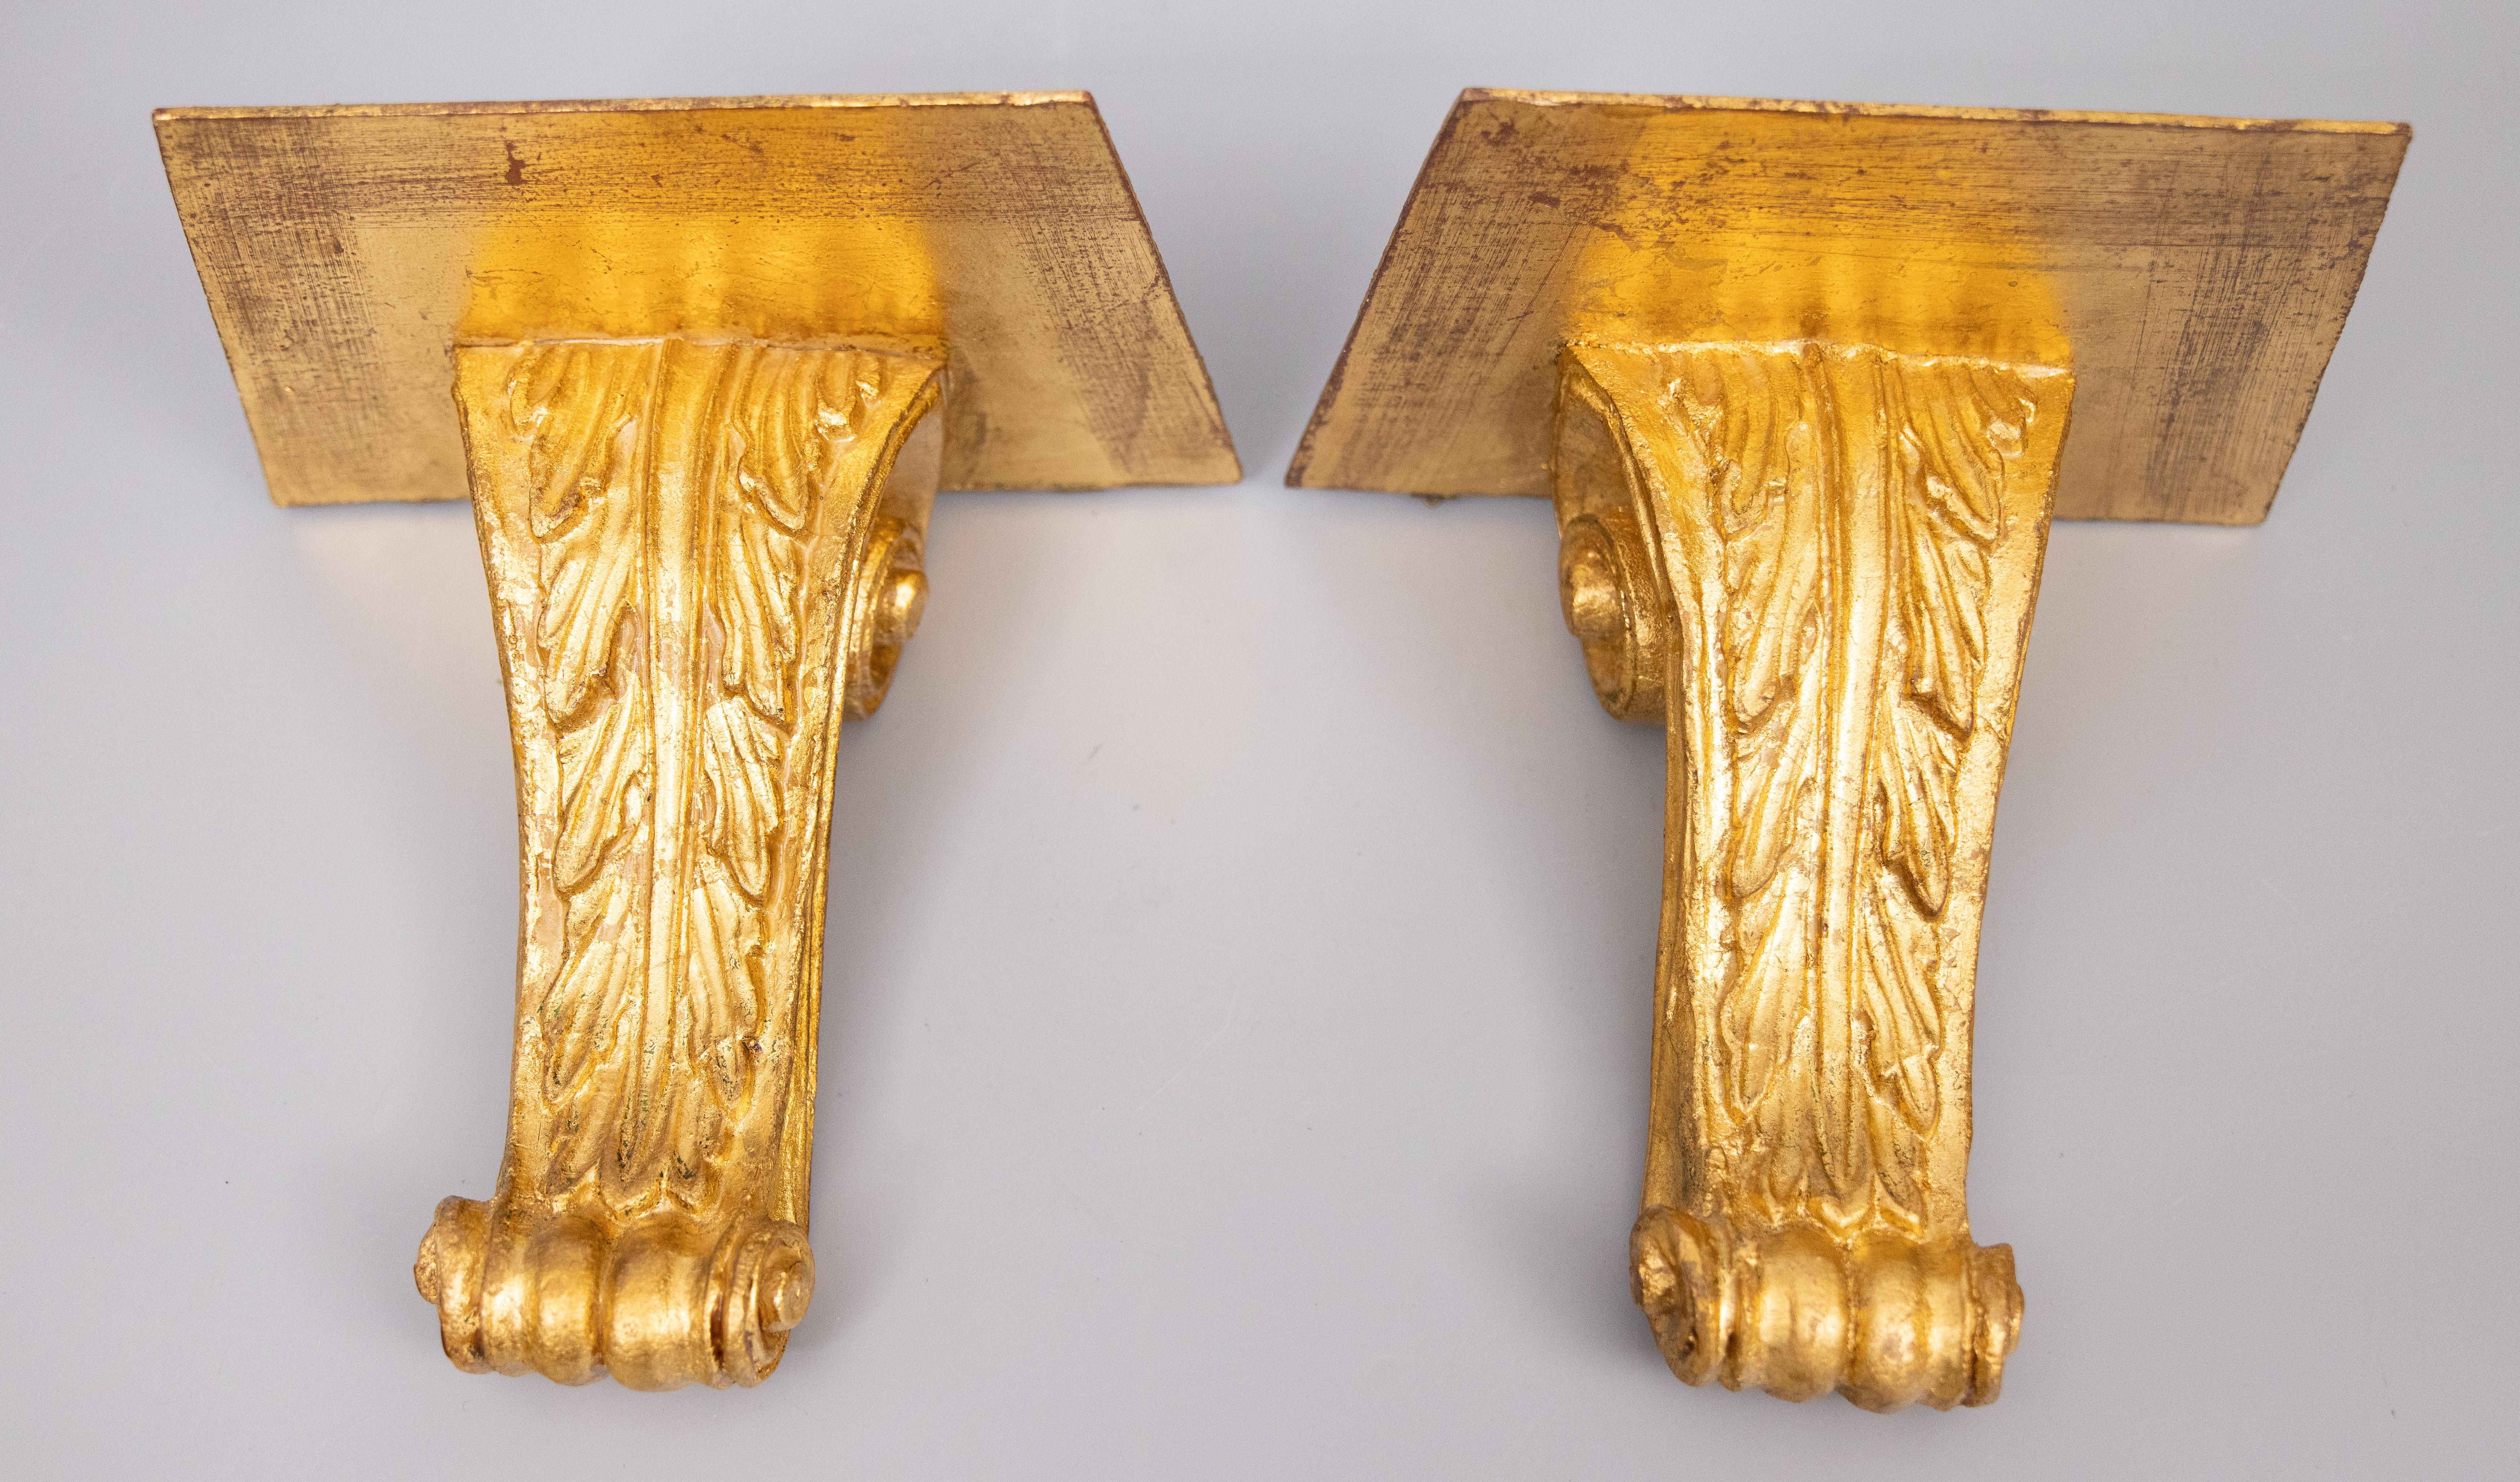 Neoclassical Revival Pair of Mid-20th Century Italian Carved Giltwood Wall Brackets Shelves For Sale